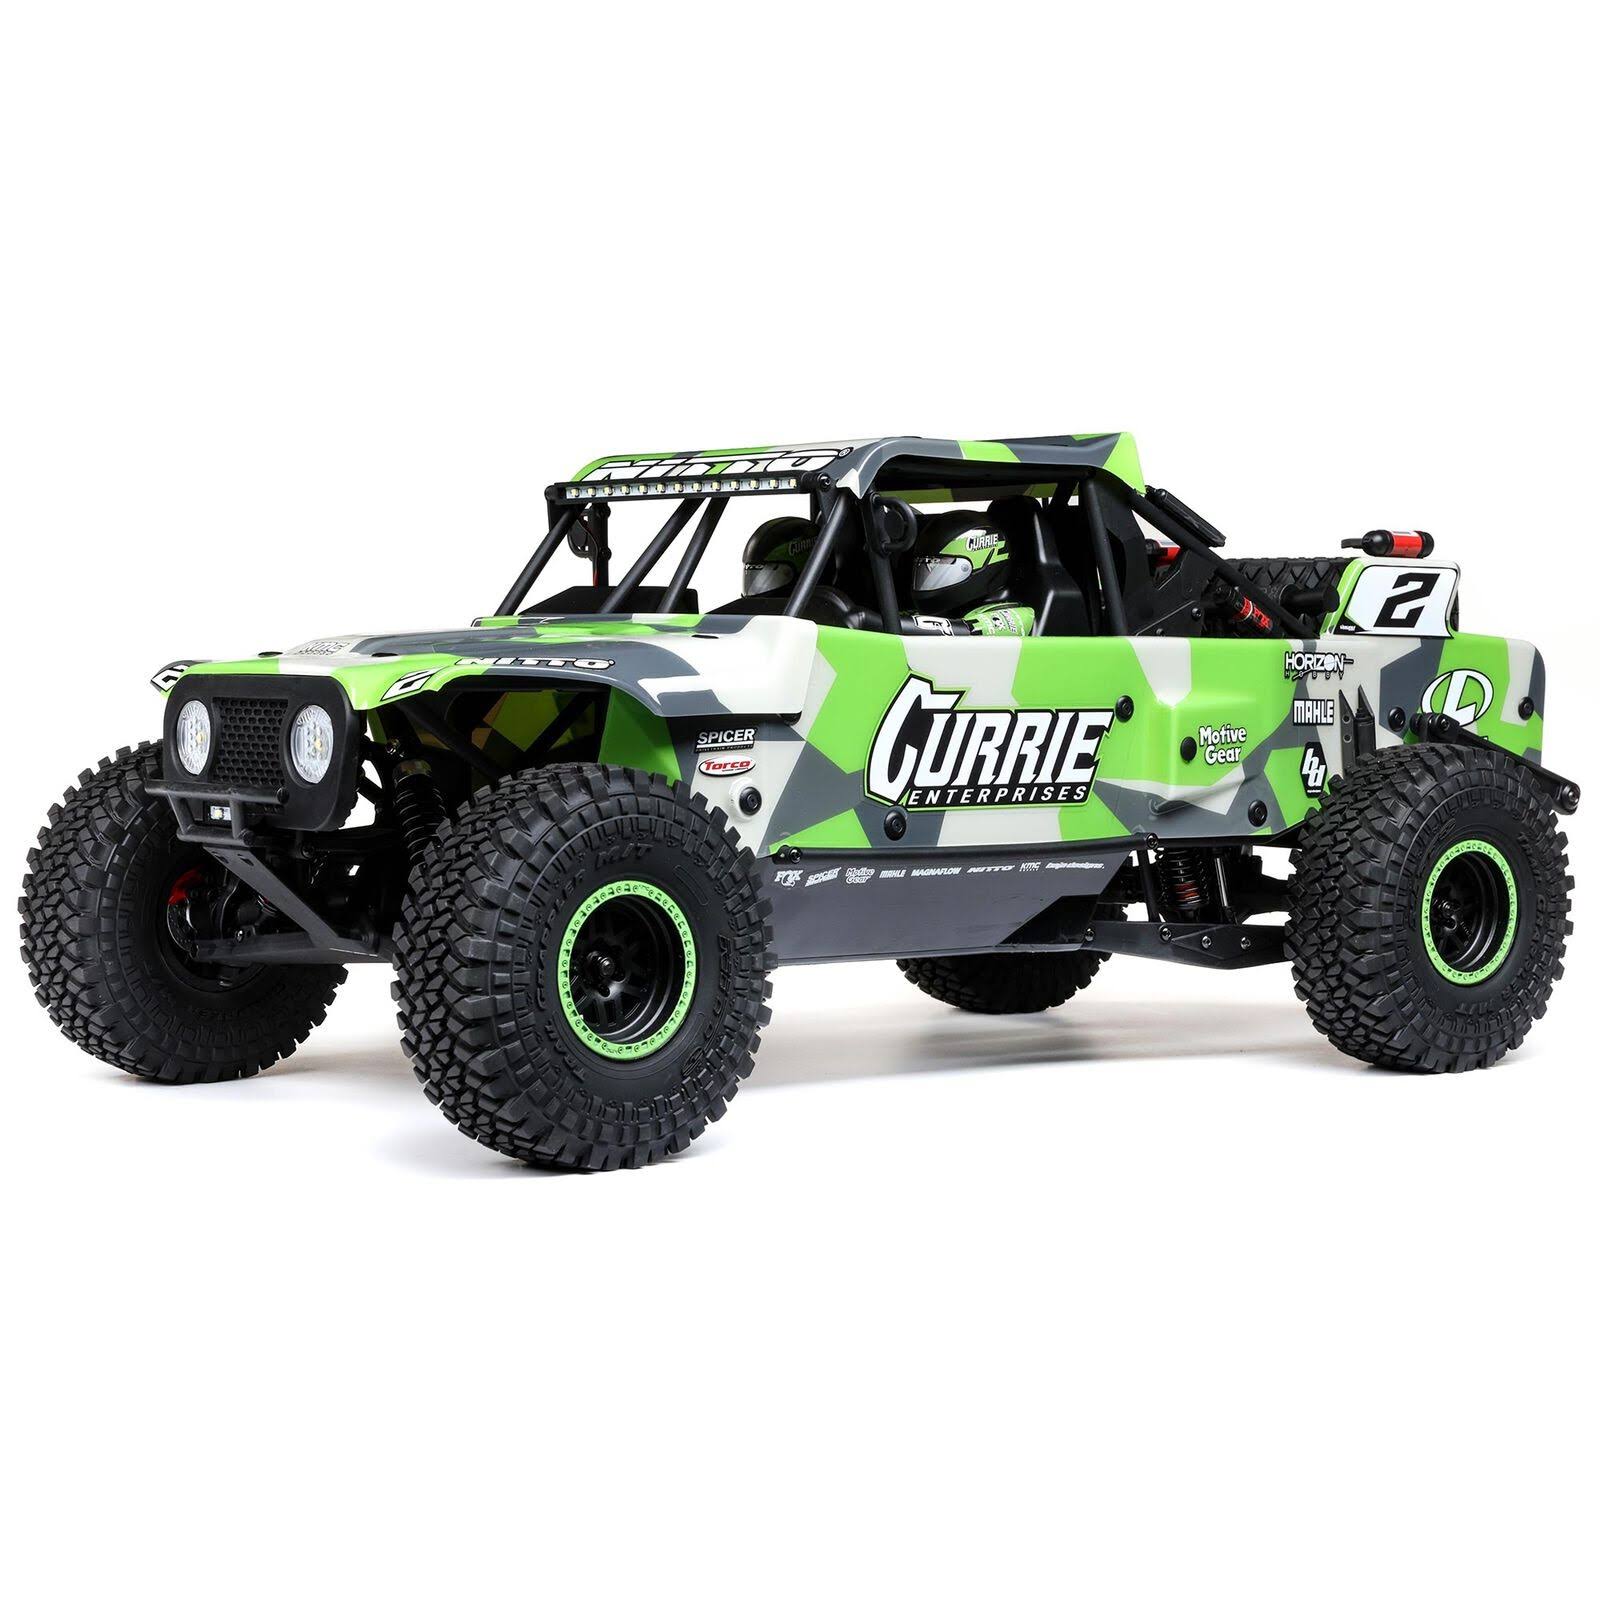 Losi Hammer Rey Currie Edition 1/10 4WD Brushless RTR, Green - LOS03030T2